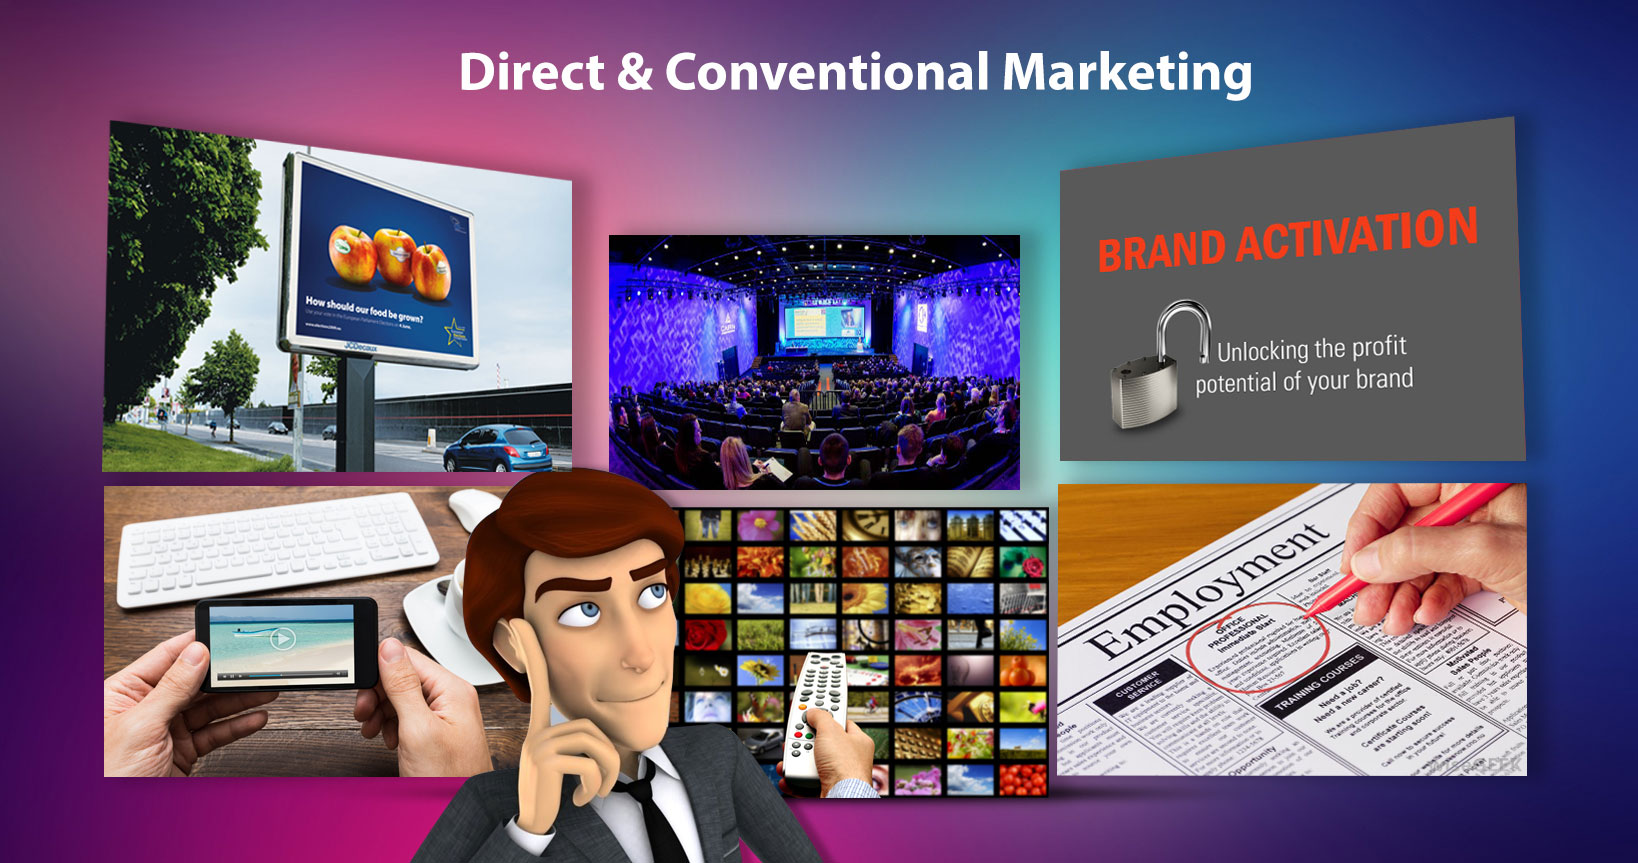 Direct & Conventional Marketing and Advertising